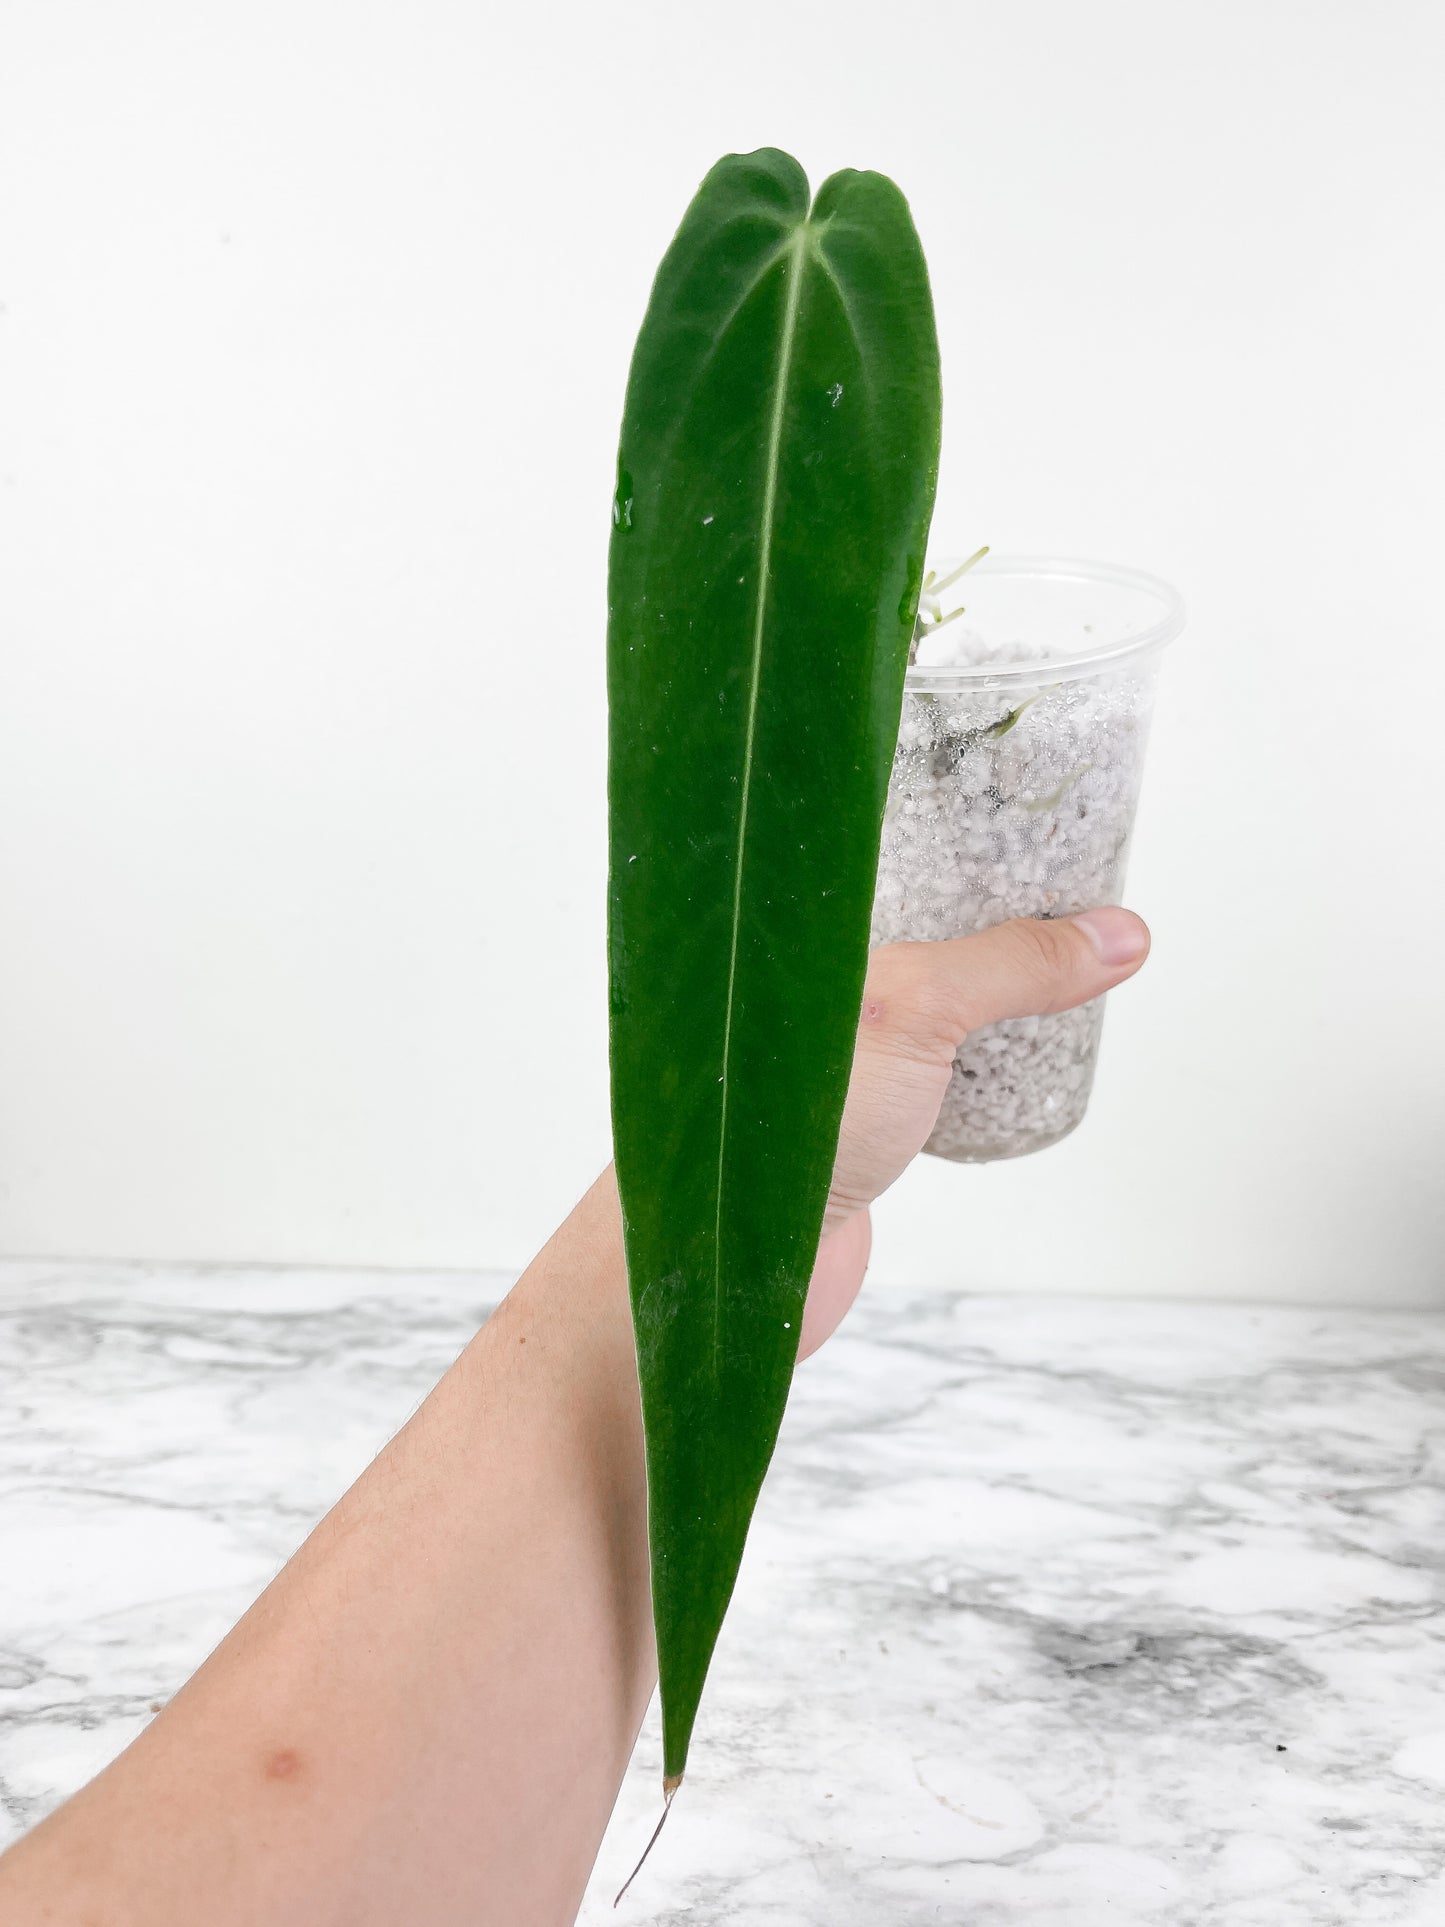 Anthurium warocqueanum (Dark and narrow) rooted 1 leaf 6-7" long